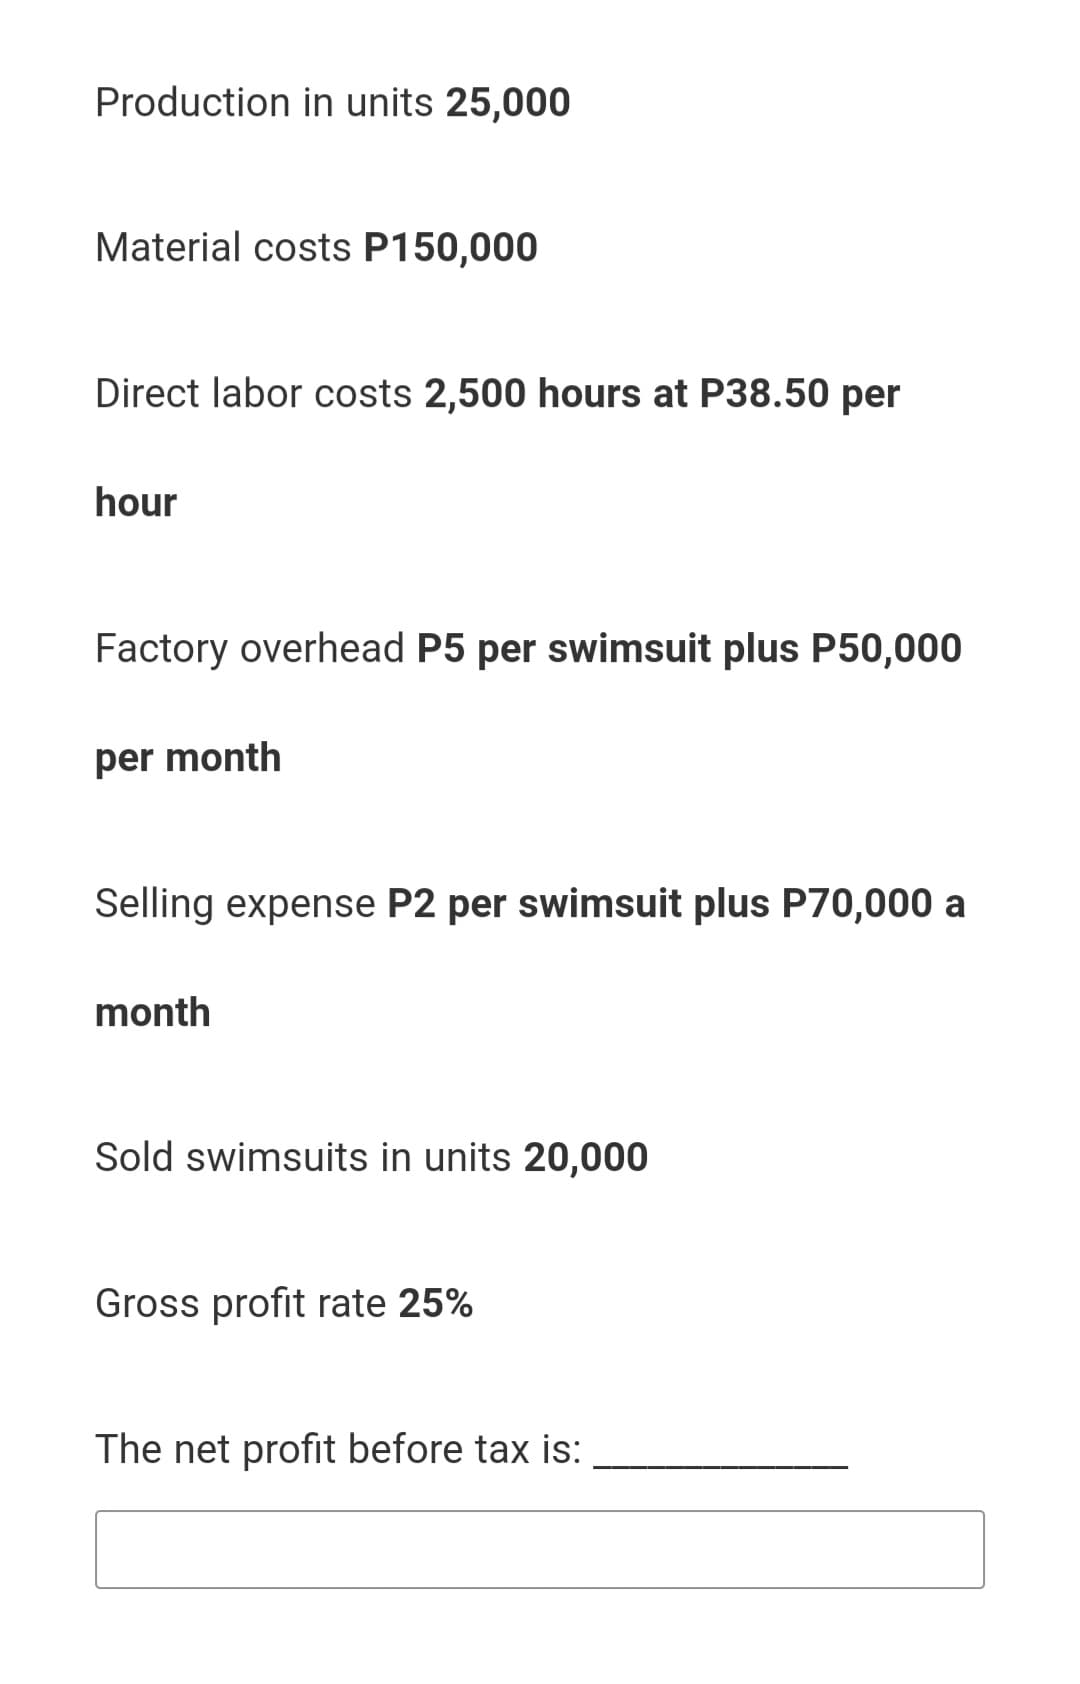 Production in units 25,000
Material costs P150,000
Direct labor costs 2,500 hours at P38.50 per
hour
Factory overhead P5 per swimsuit plus P50,000
per month
Selling expense P2 per swimsuit plus P70,000 a
month
Sold swimsuits in units 20,000
Gross profit rate 25%
The net profit before tax is:
